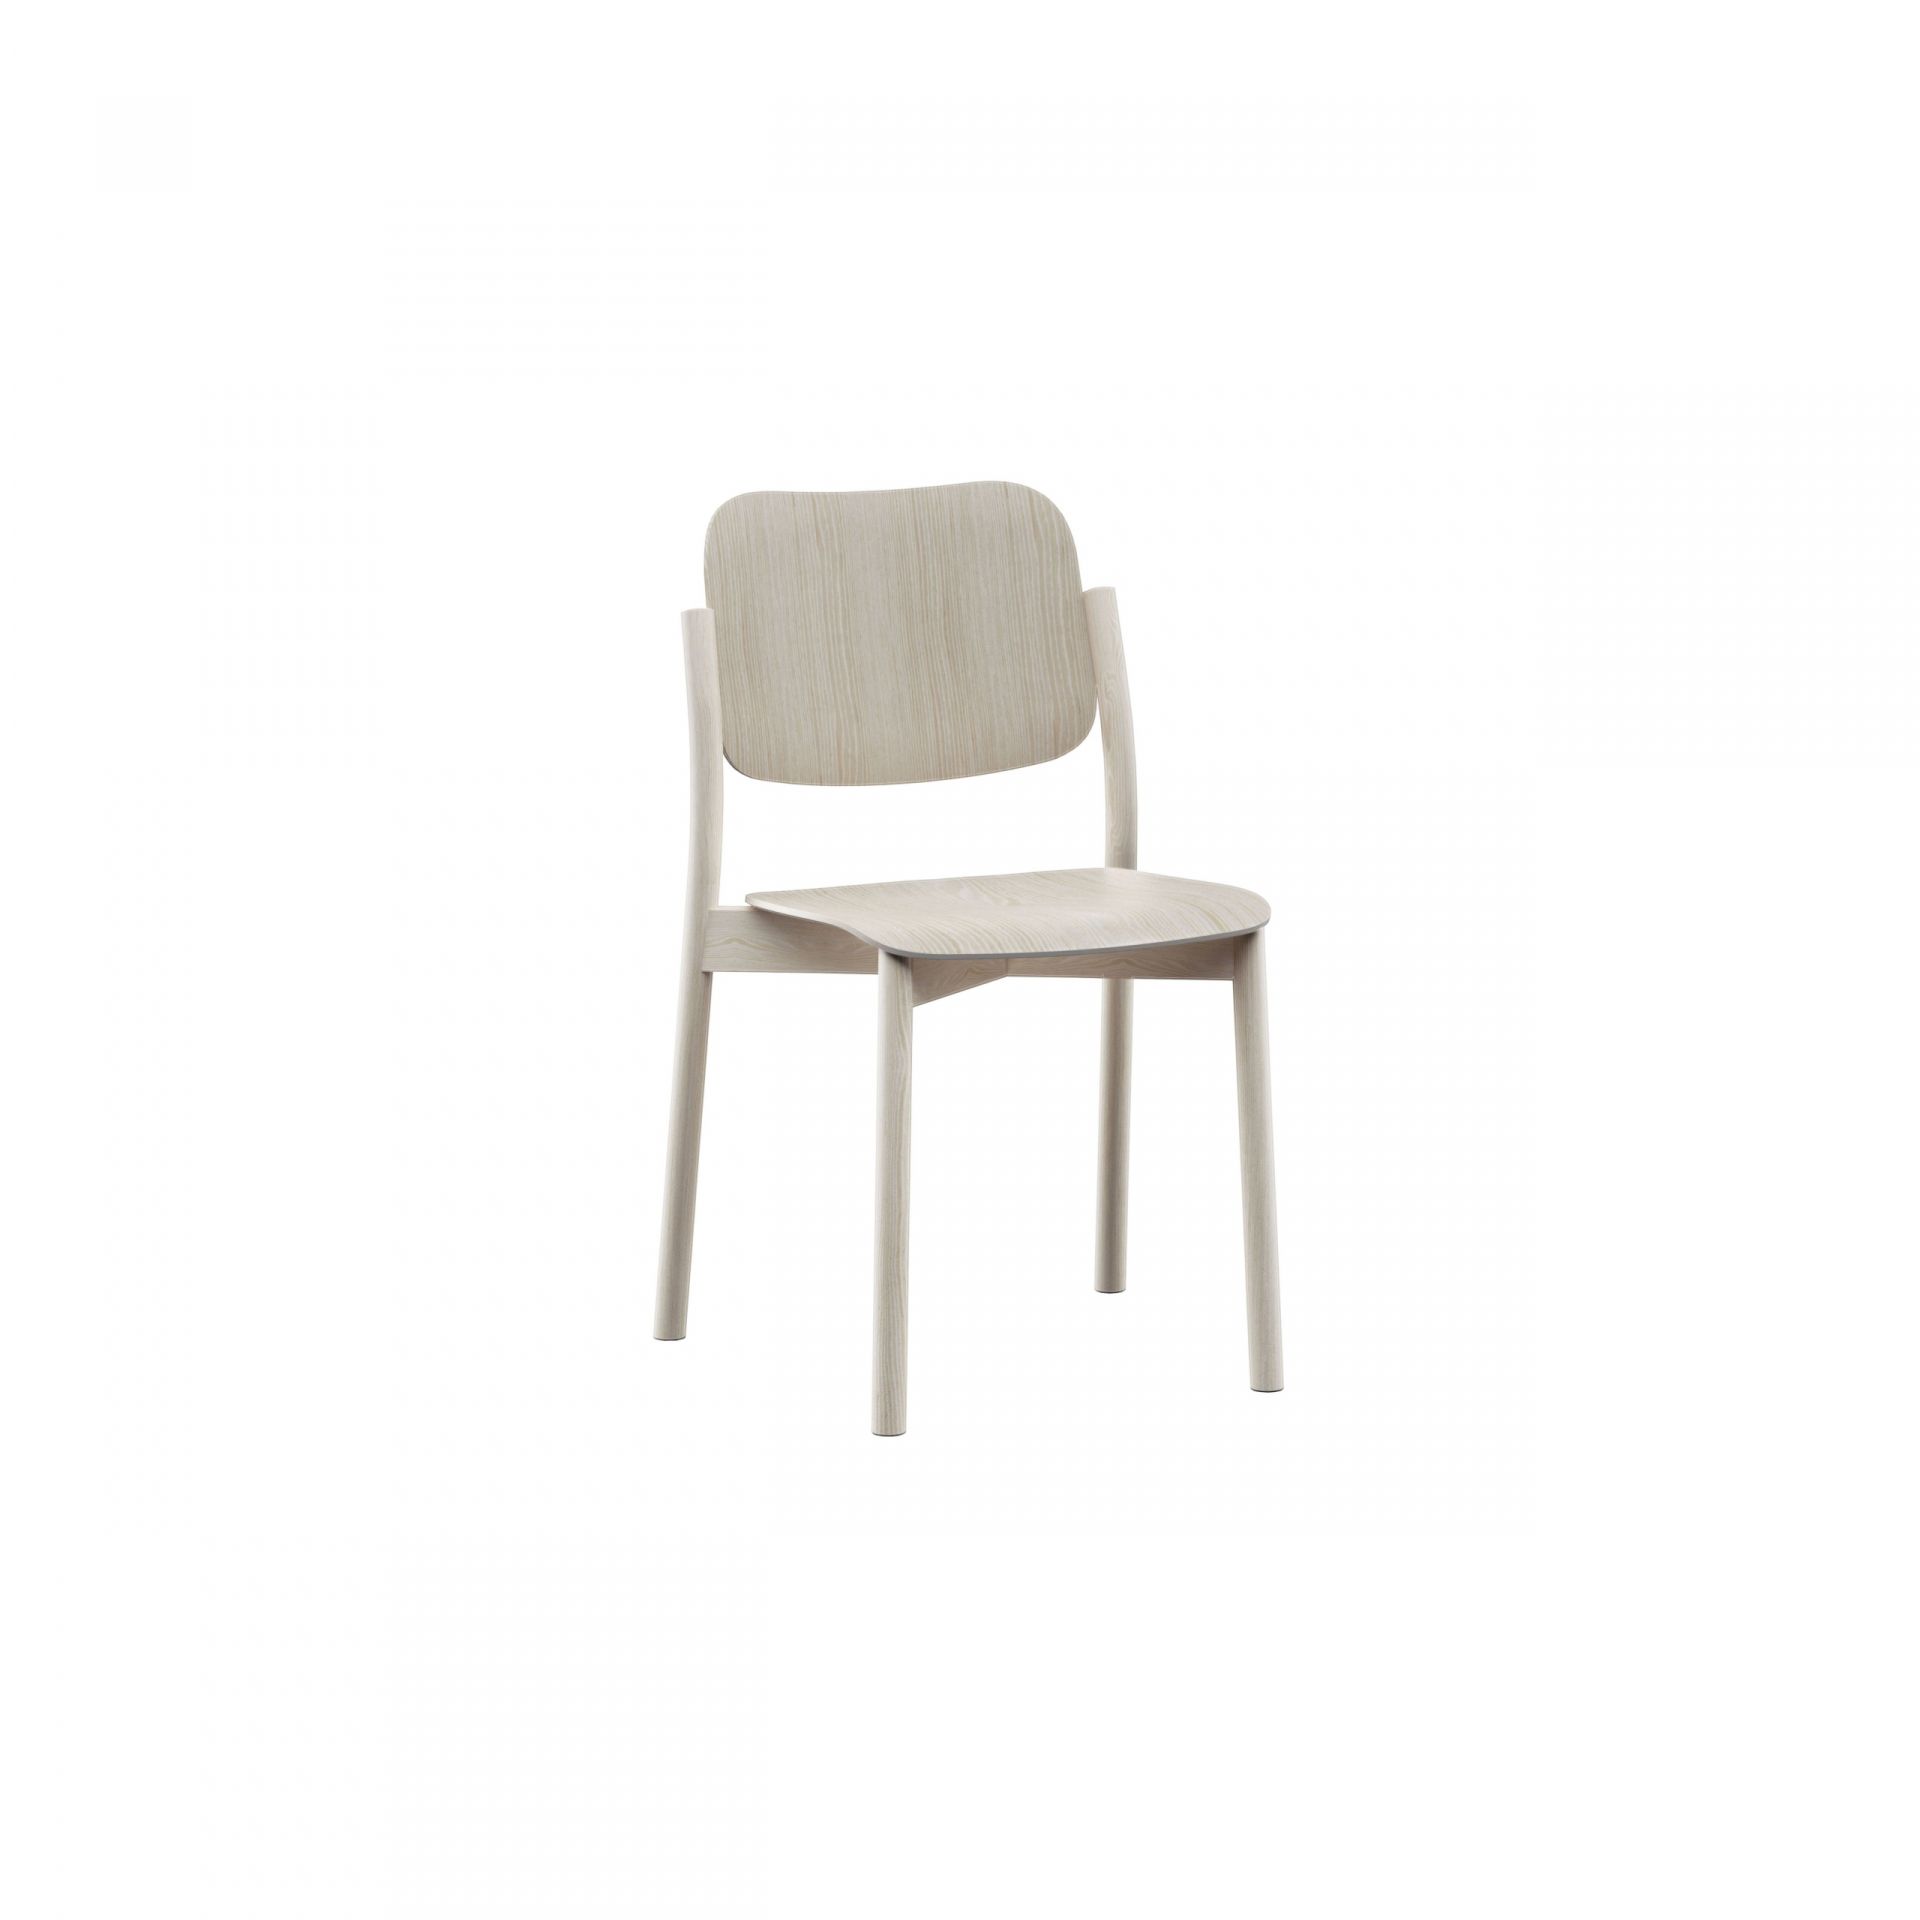 Zoe Wooden chair product image 3